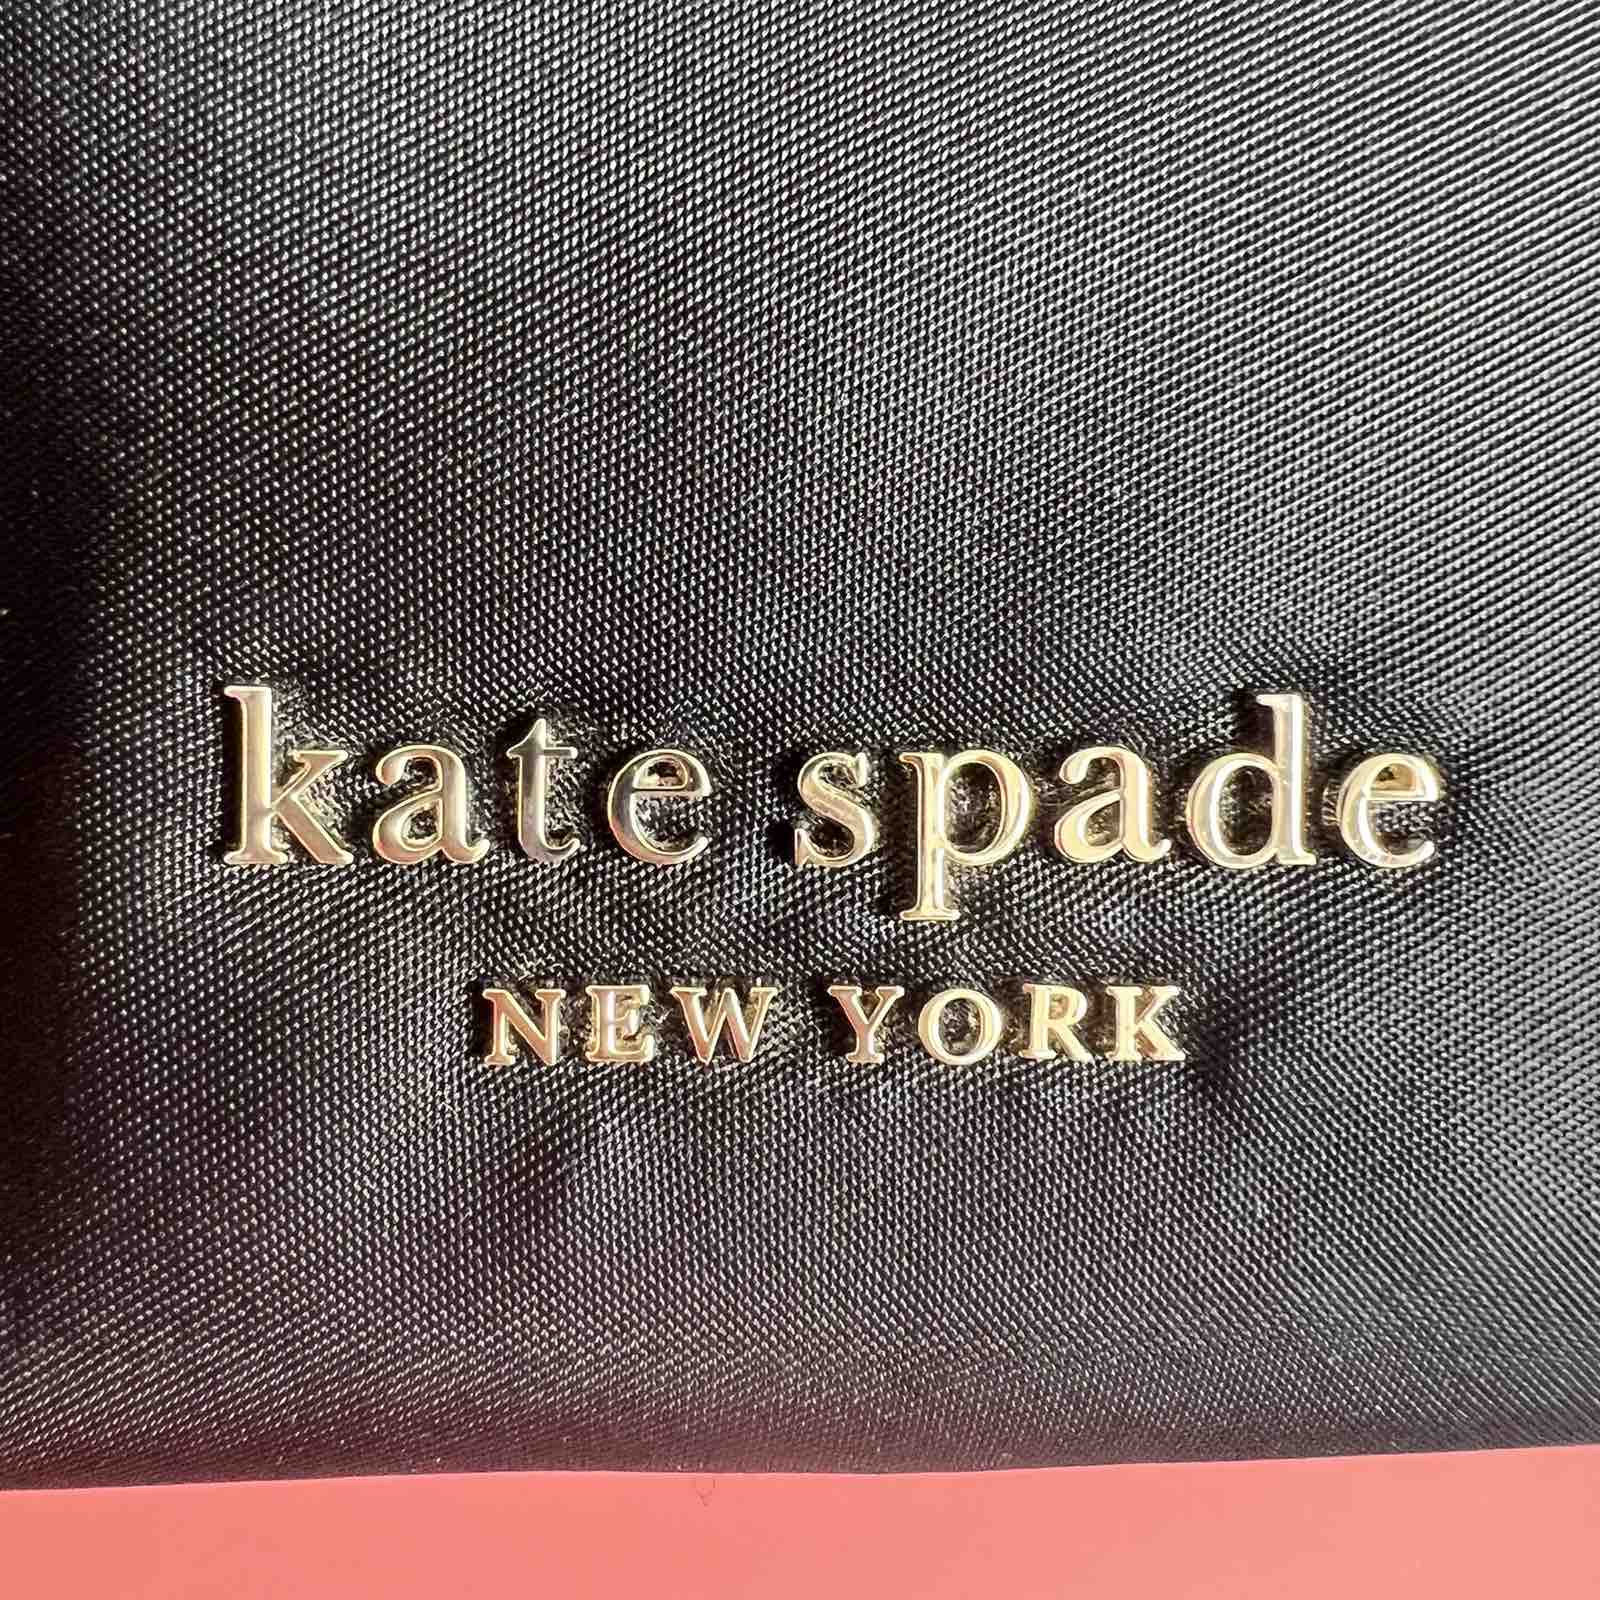 Kate Spade The Little Better Sam Black Nylon Shoulder Bag. Made in The  Philippines. No inclusions ❤️